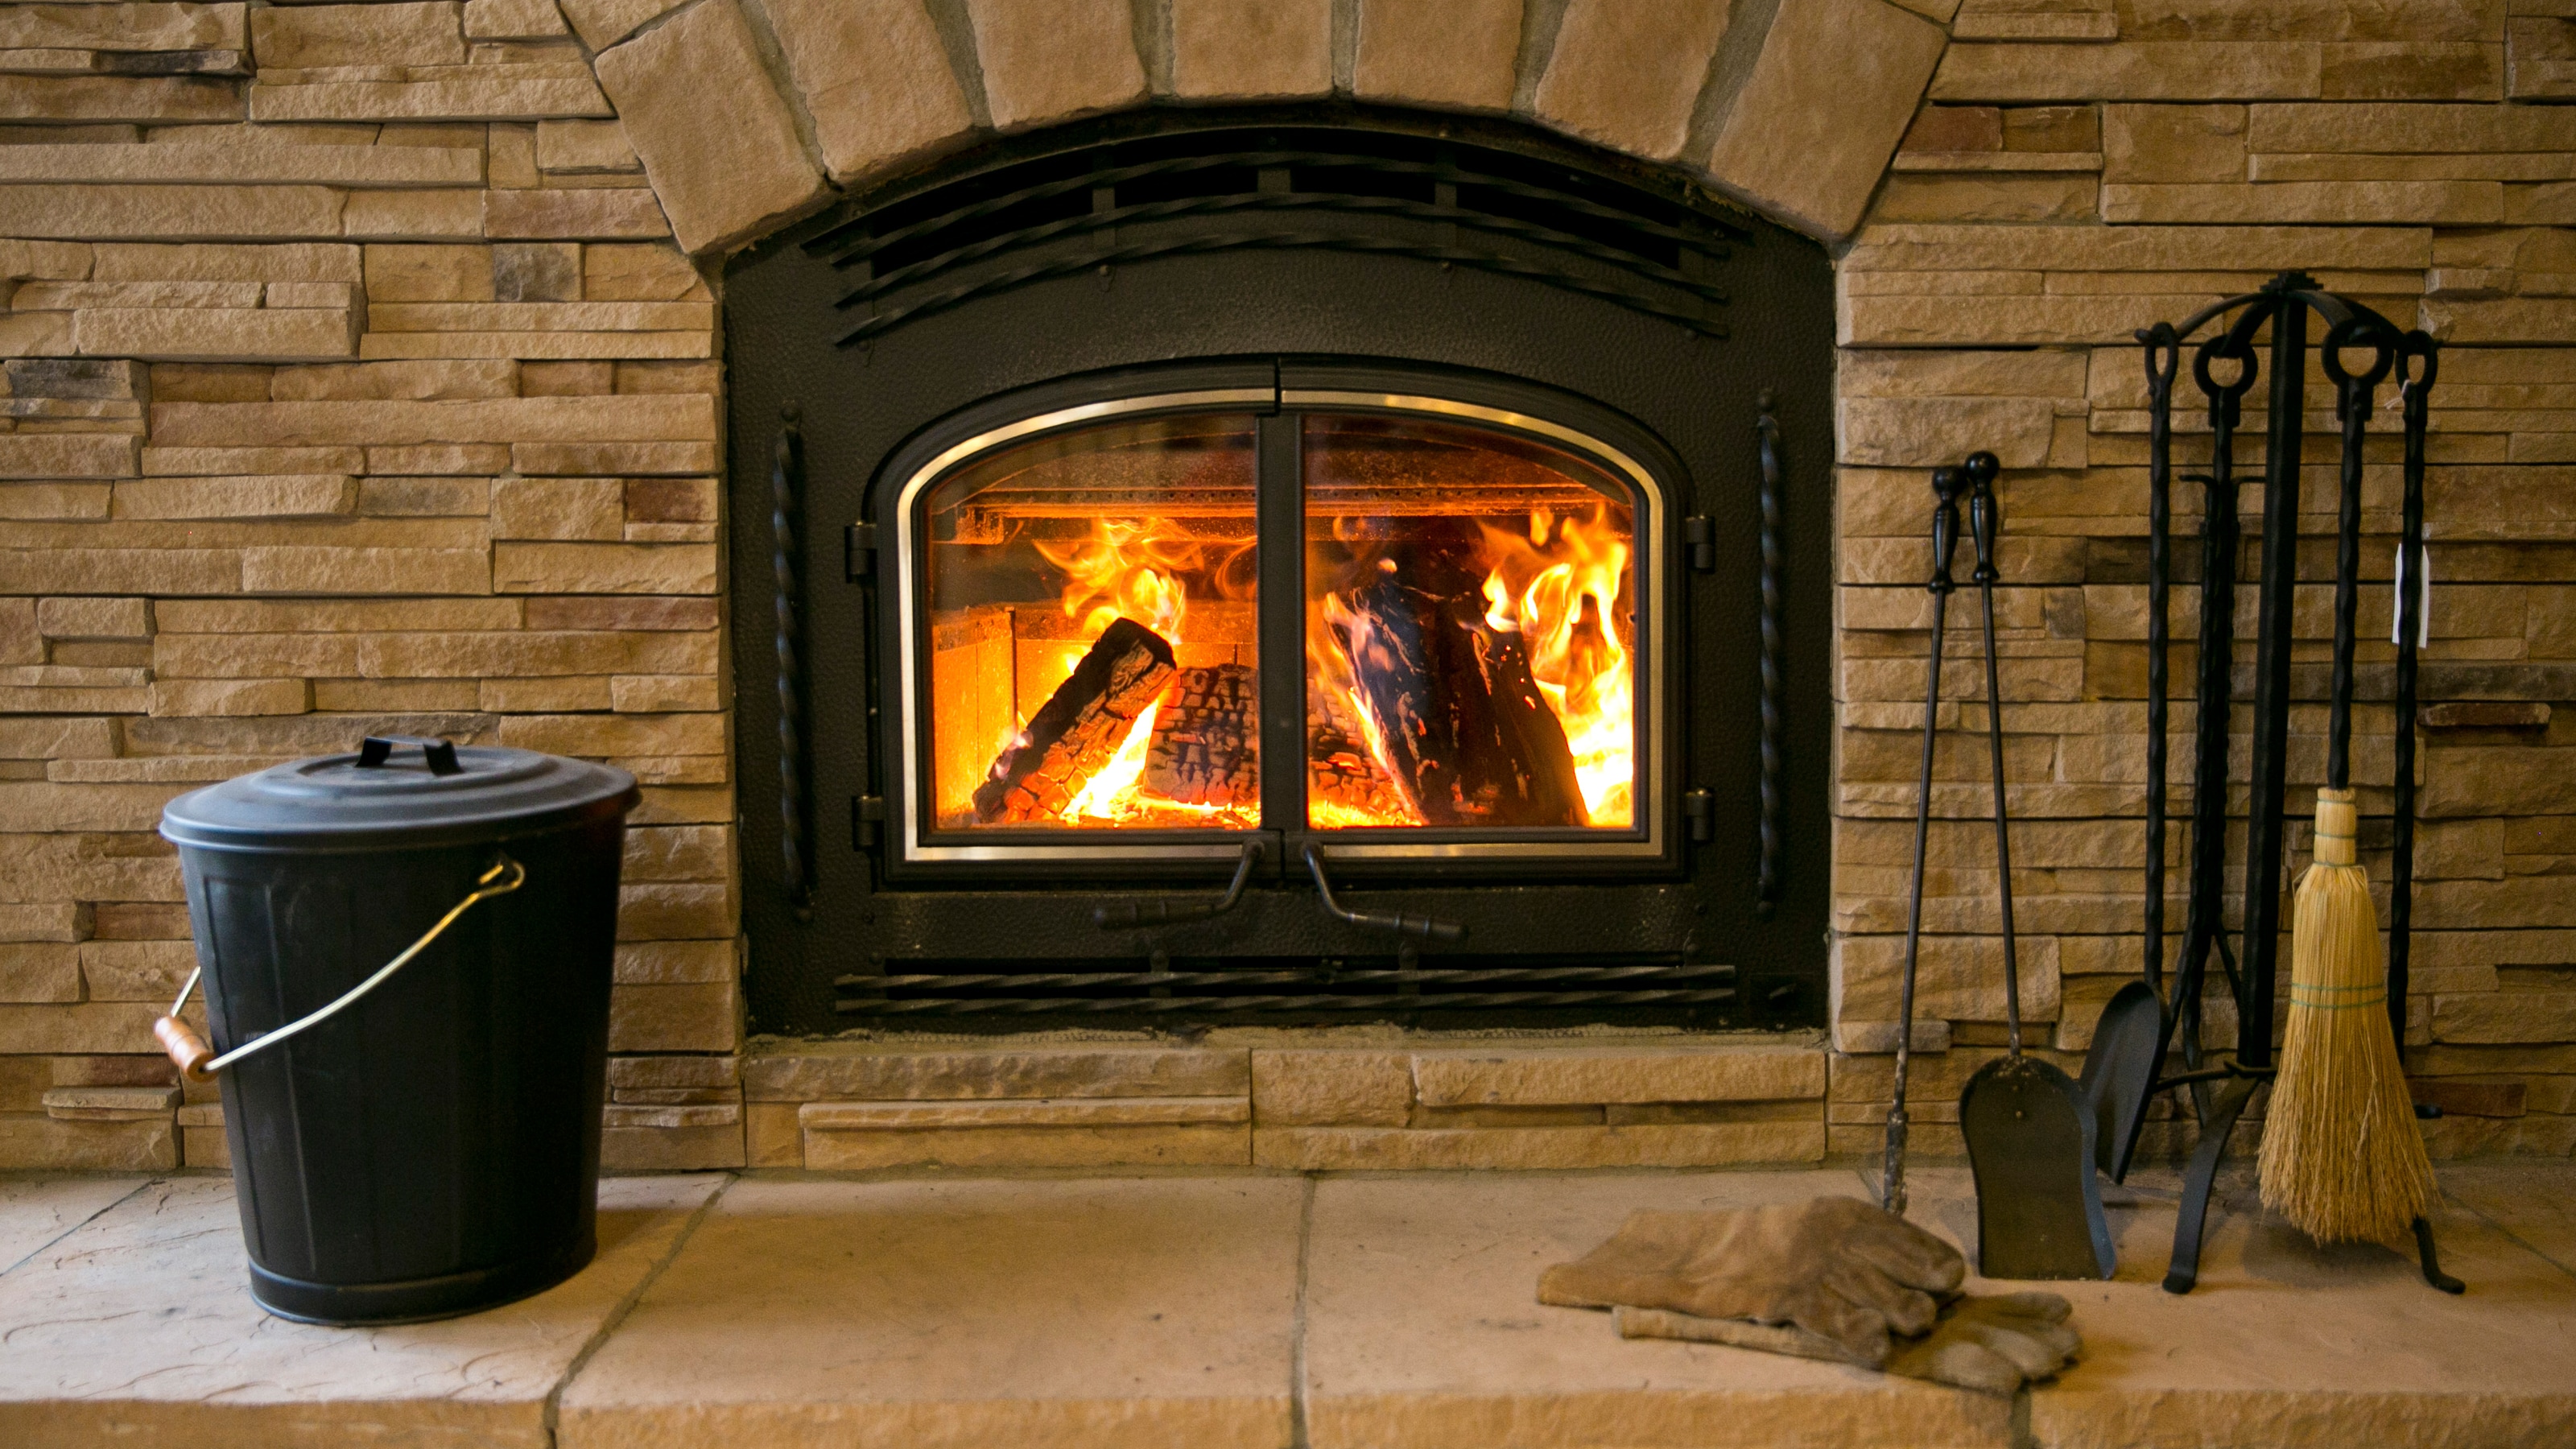 Fireplace Fresh Air Intake Vent Elegant How to Convert A Gas Fireplace to Wood Burning